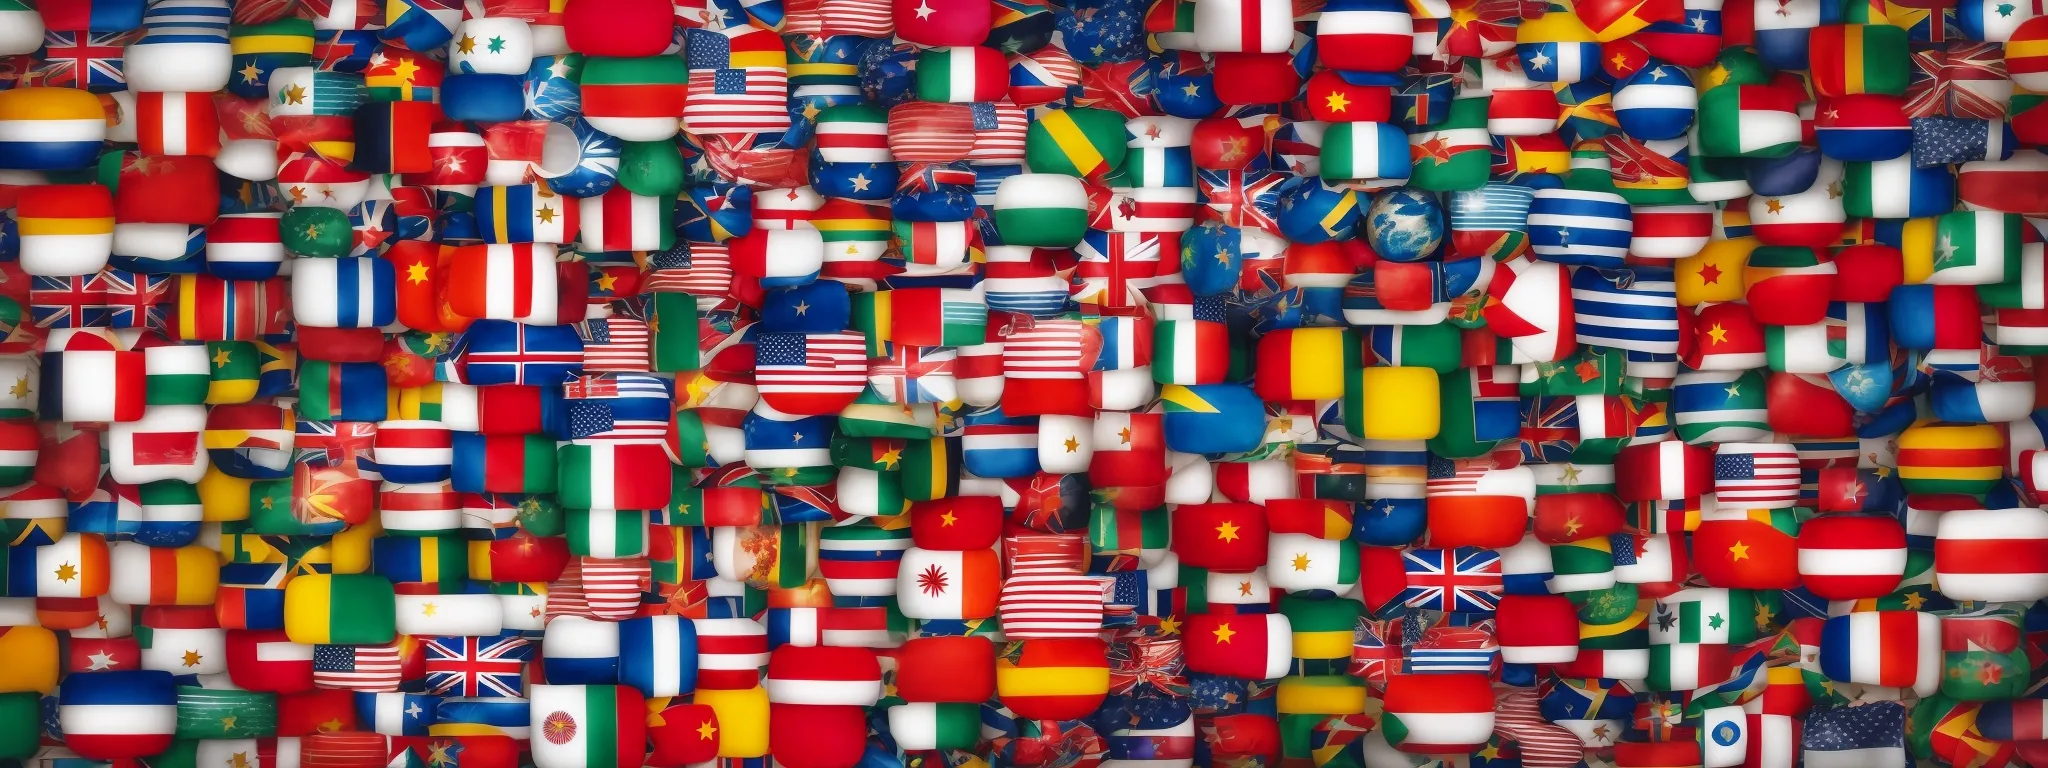 a globe surrounded by flags from different countries, symbolizing international diversity and connectivity.